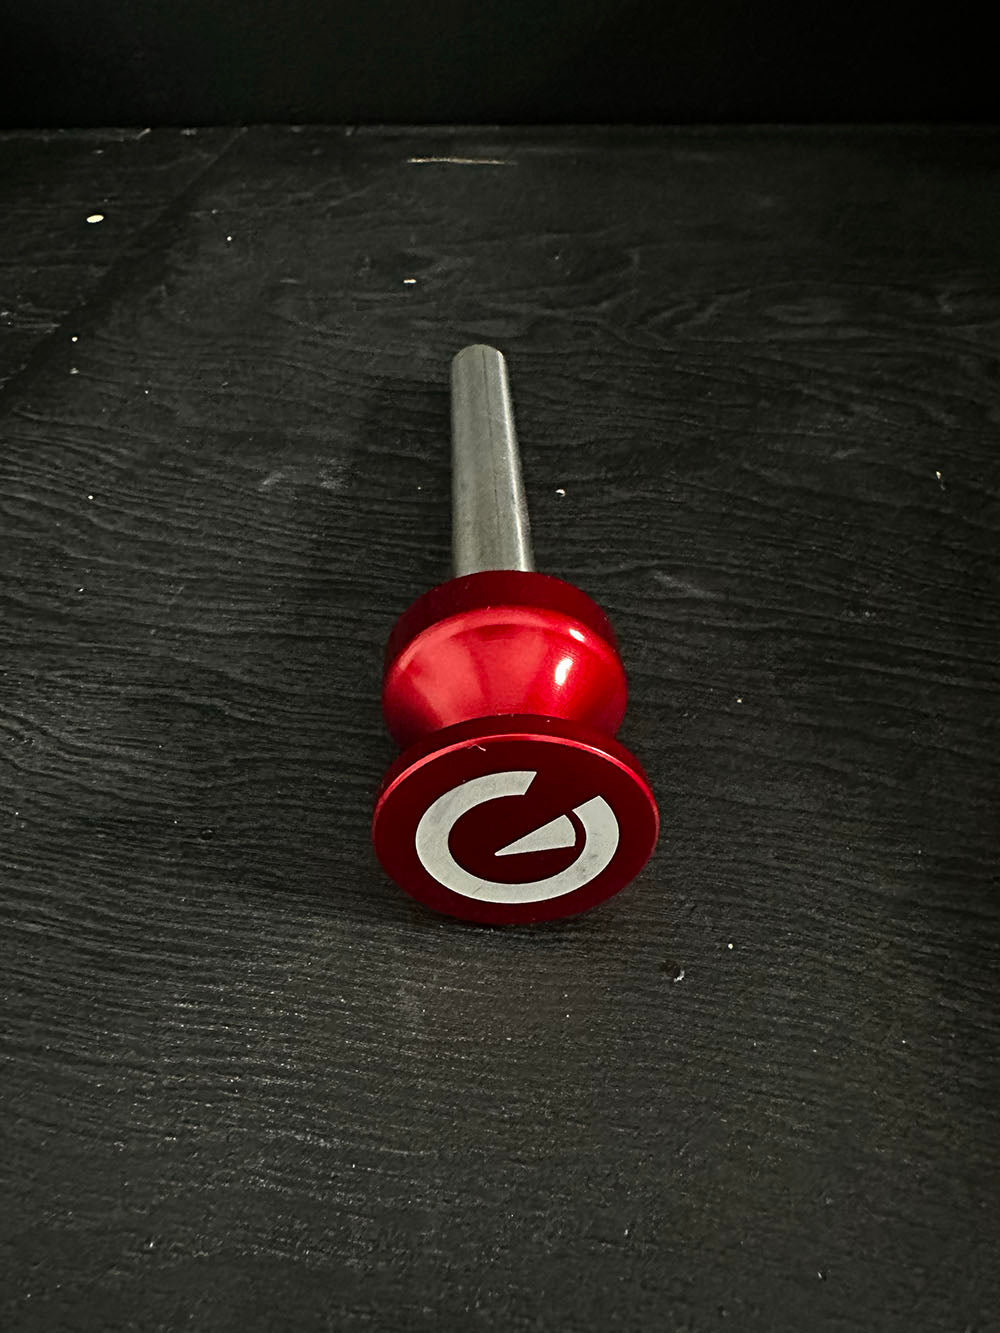 Custom Exponent Edge Magnetic pins fit all major brands of squat racks, power racks, and accessories, including Exponent Edge workout equipment. This image presents the Magnetic Edge Pin in red from a close-up, front view.